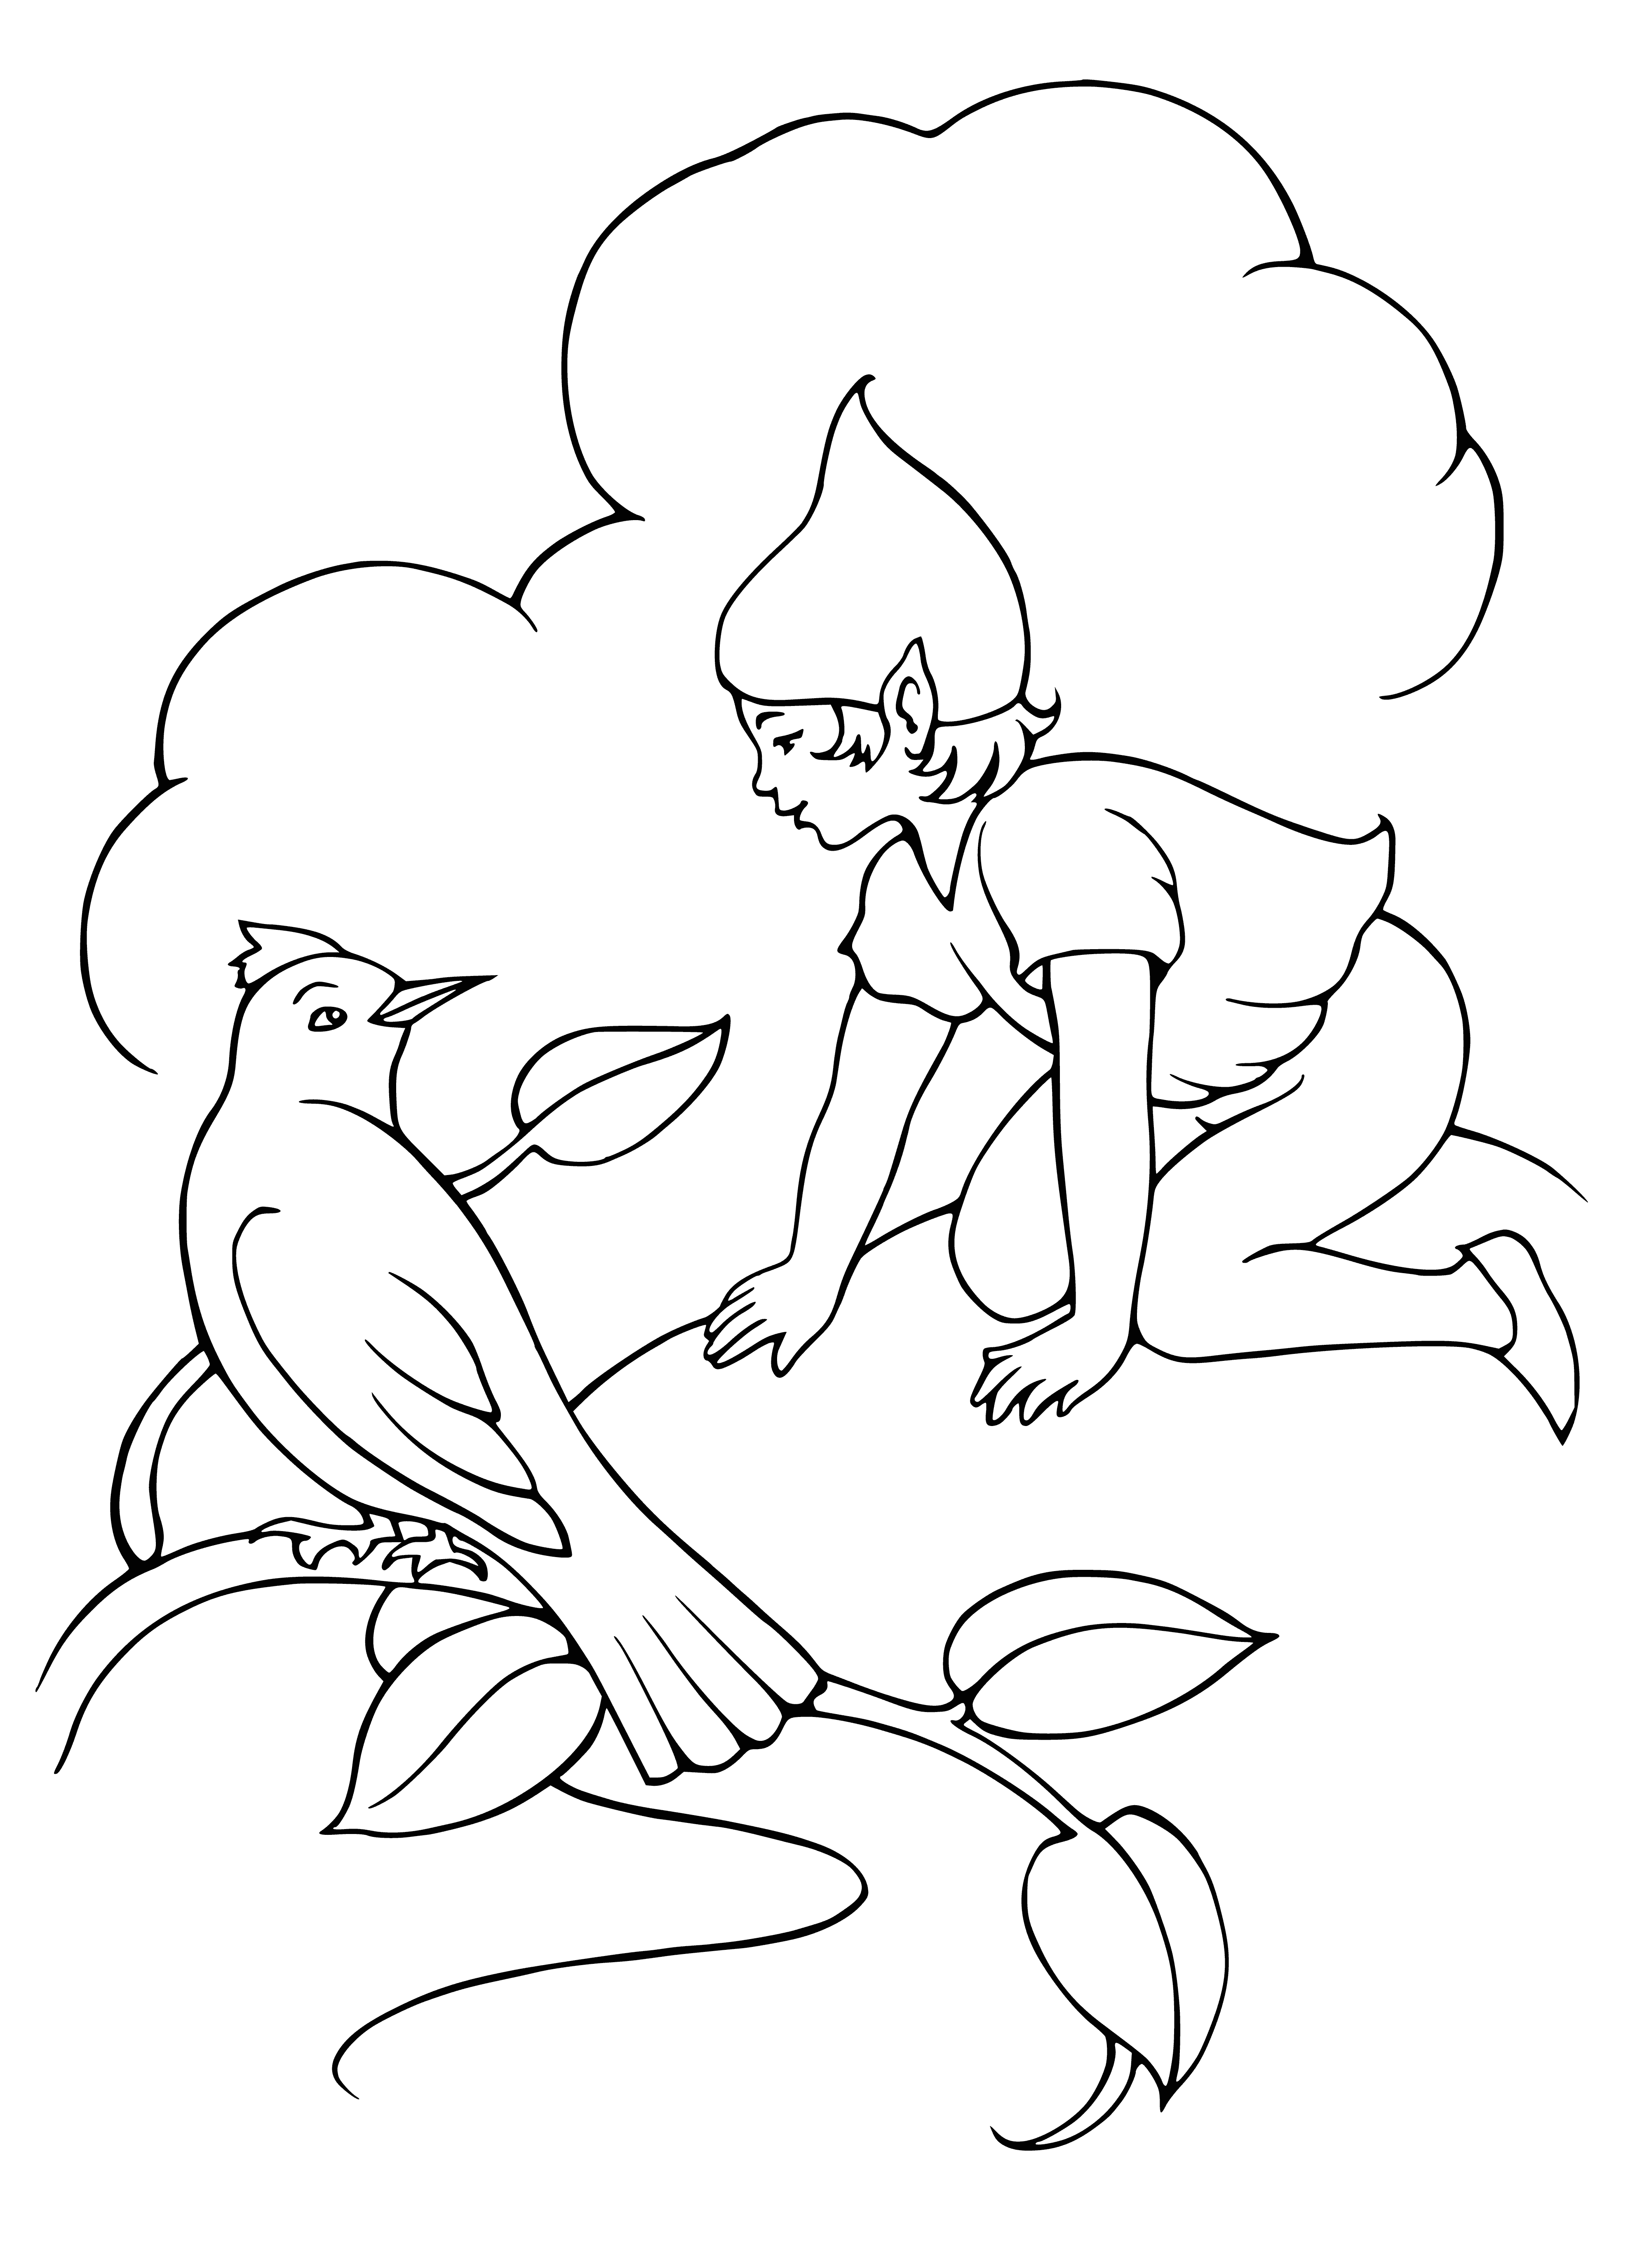 Elf talking to a bird coloring page